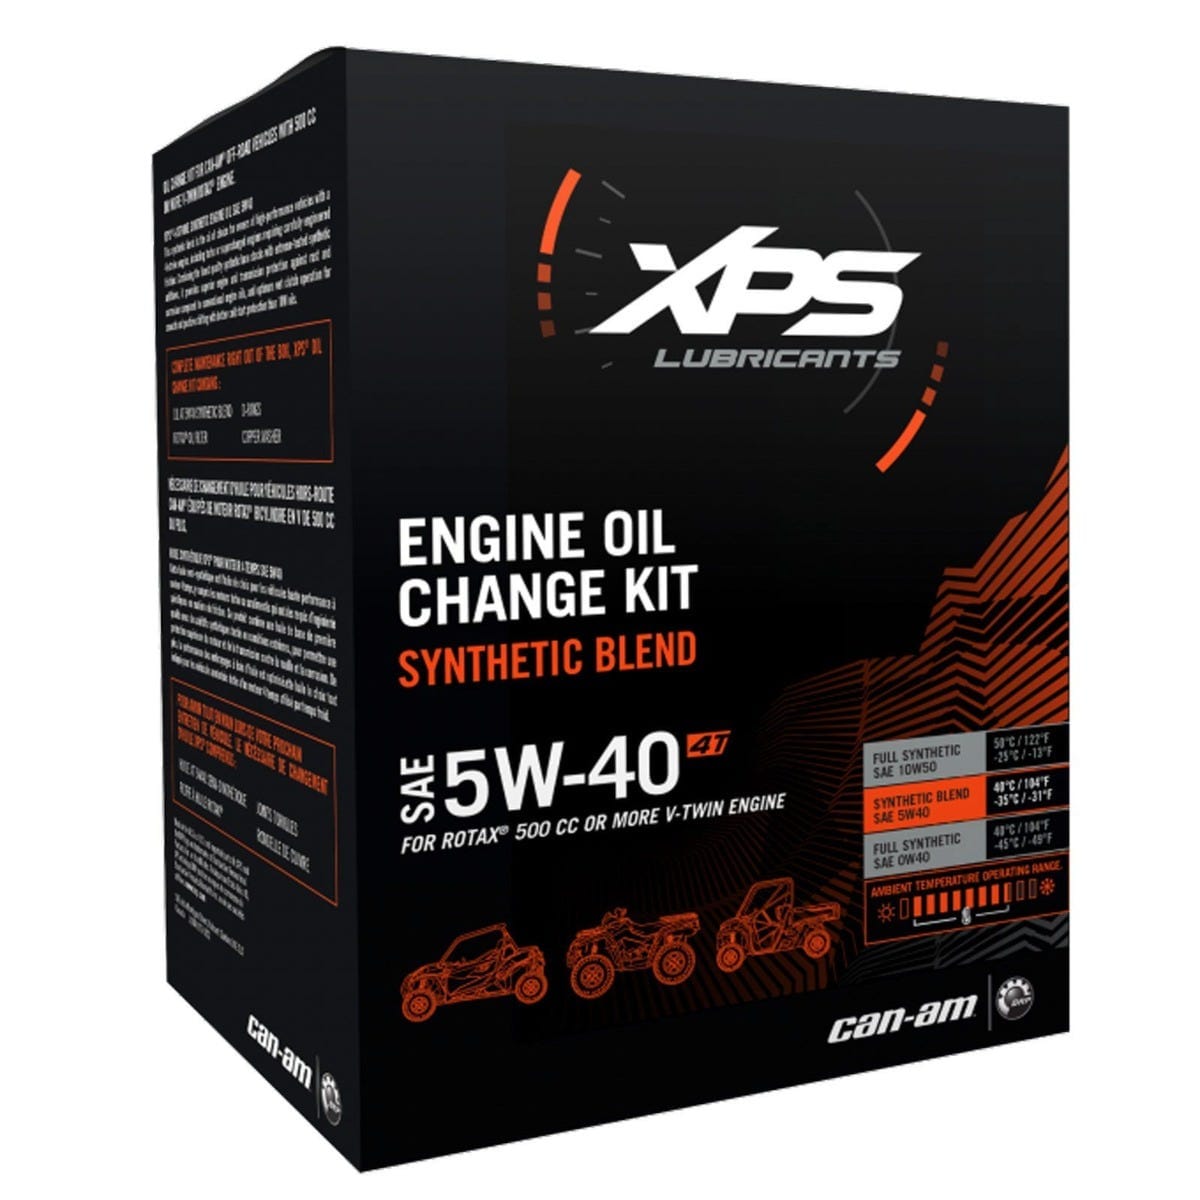 4T 5W-40 Synthetic Blend Oil Change Kit for Rotax 500 cc or more V-Twin engine